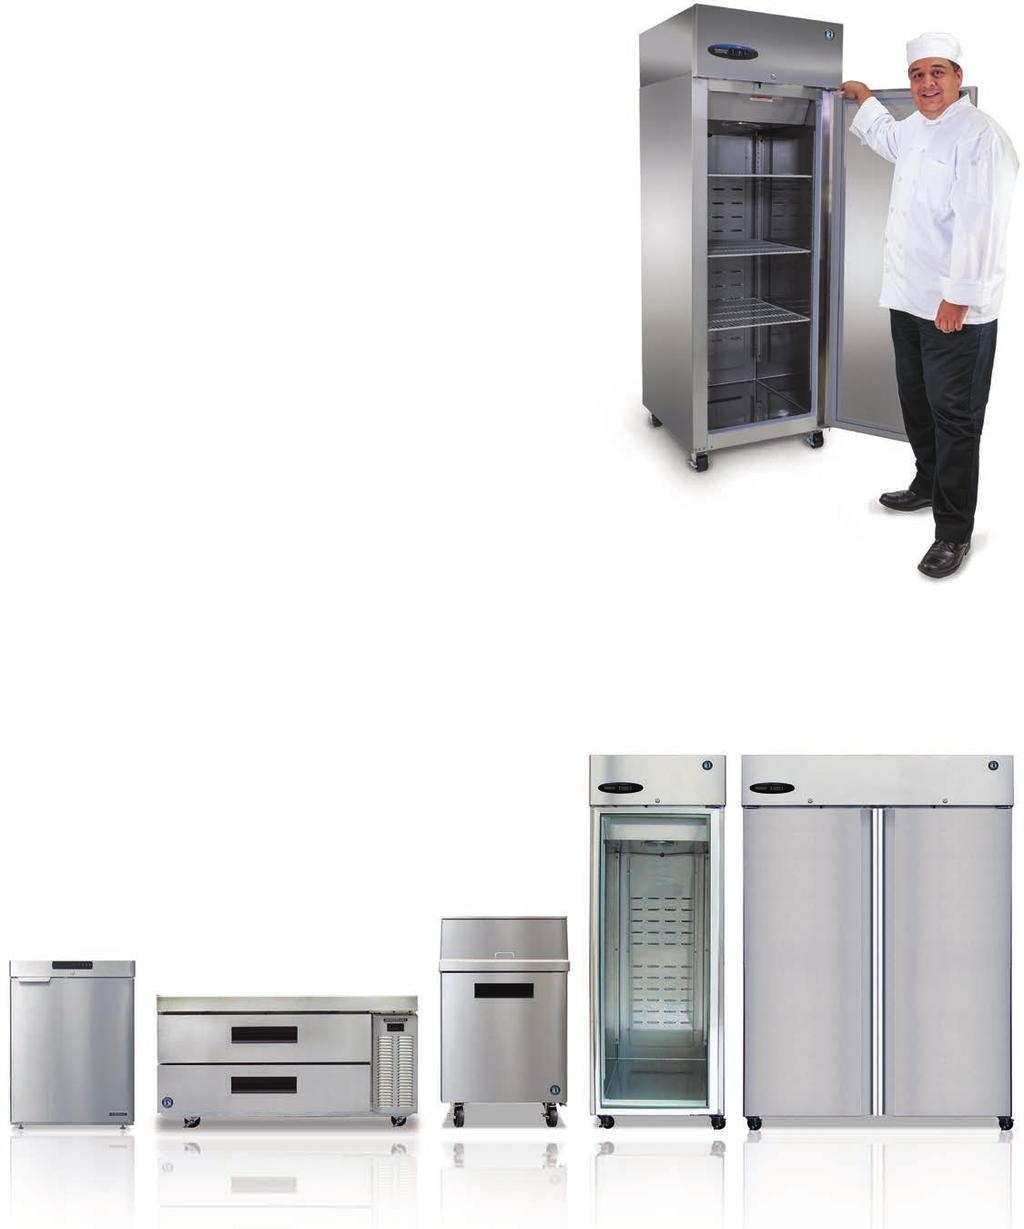 COMMERCIAL SERIES Features & Benefits of HOSHIZAKI Refrigeration Stainless steel interior and exterior front, top and sides for long life, durability and easy maintenance Self contained refrigeration